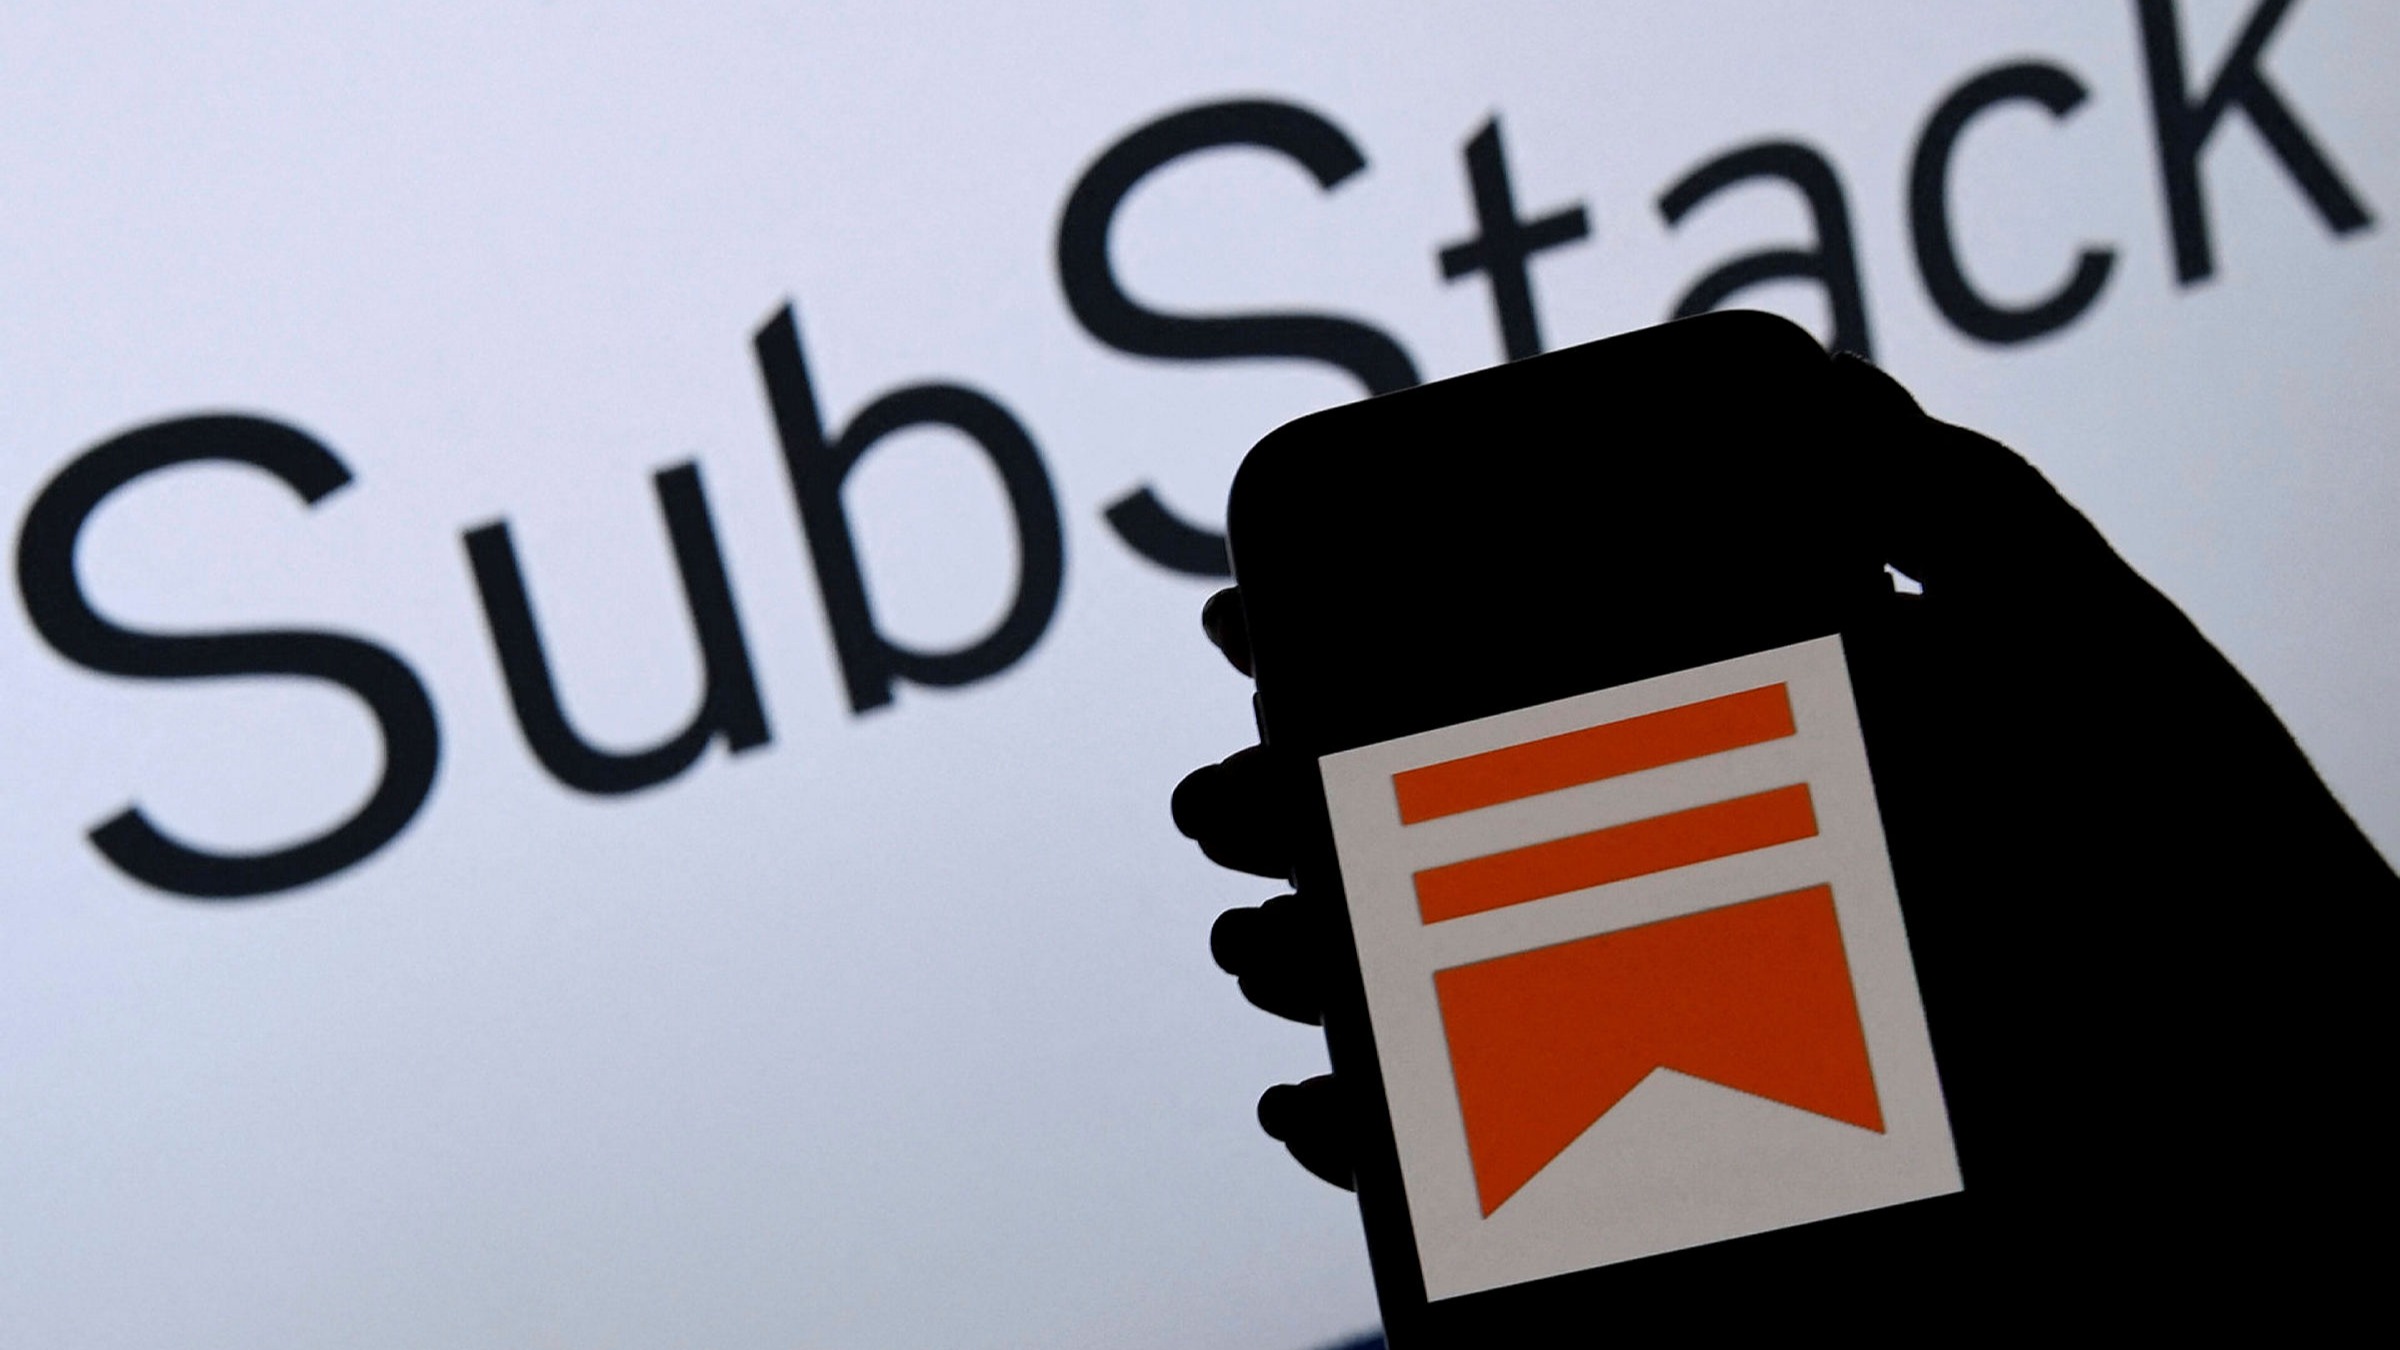 Newsletter start-up Substack hits 1m subscribers | Financial Times